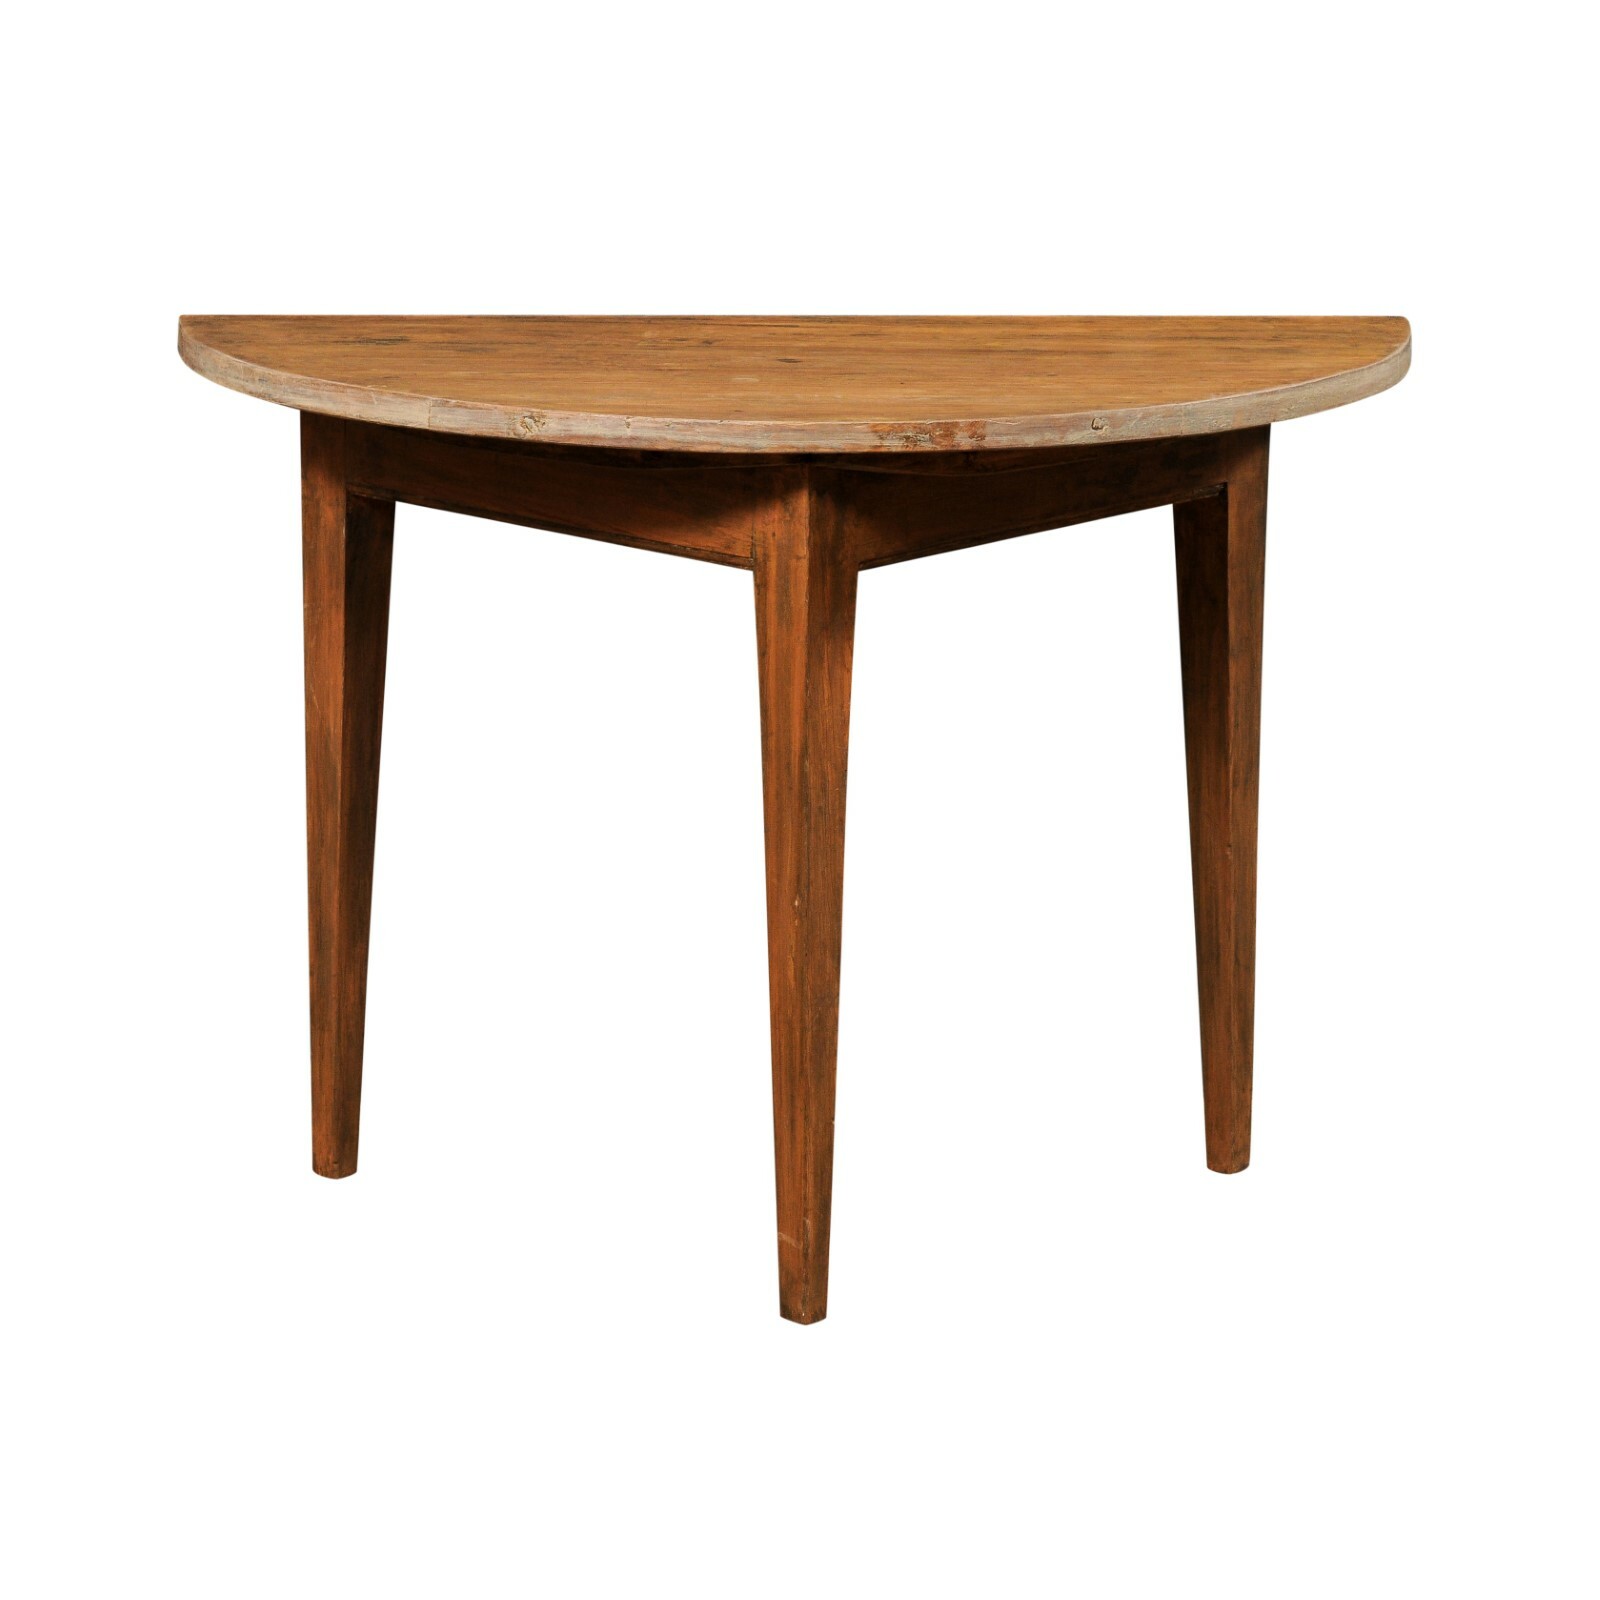 19th C. Demi-Lune Table from Sweden